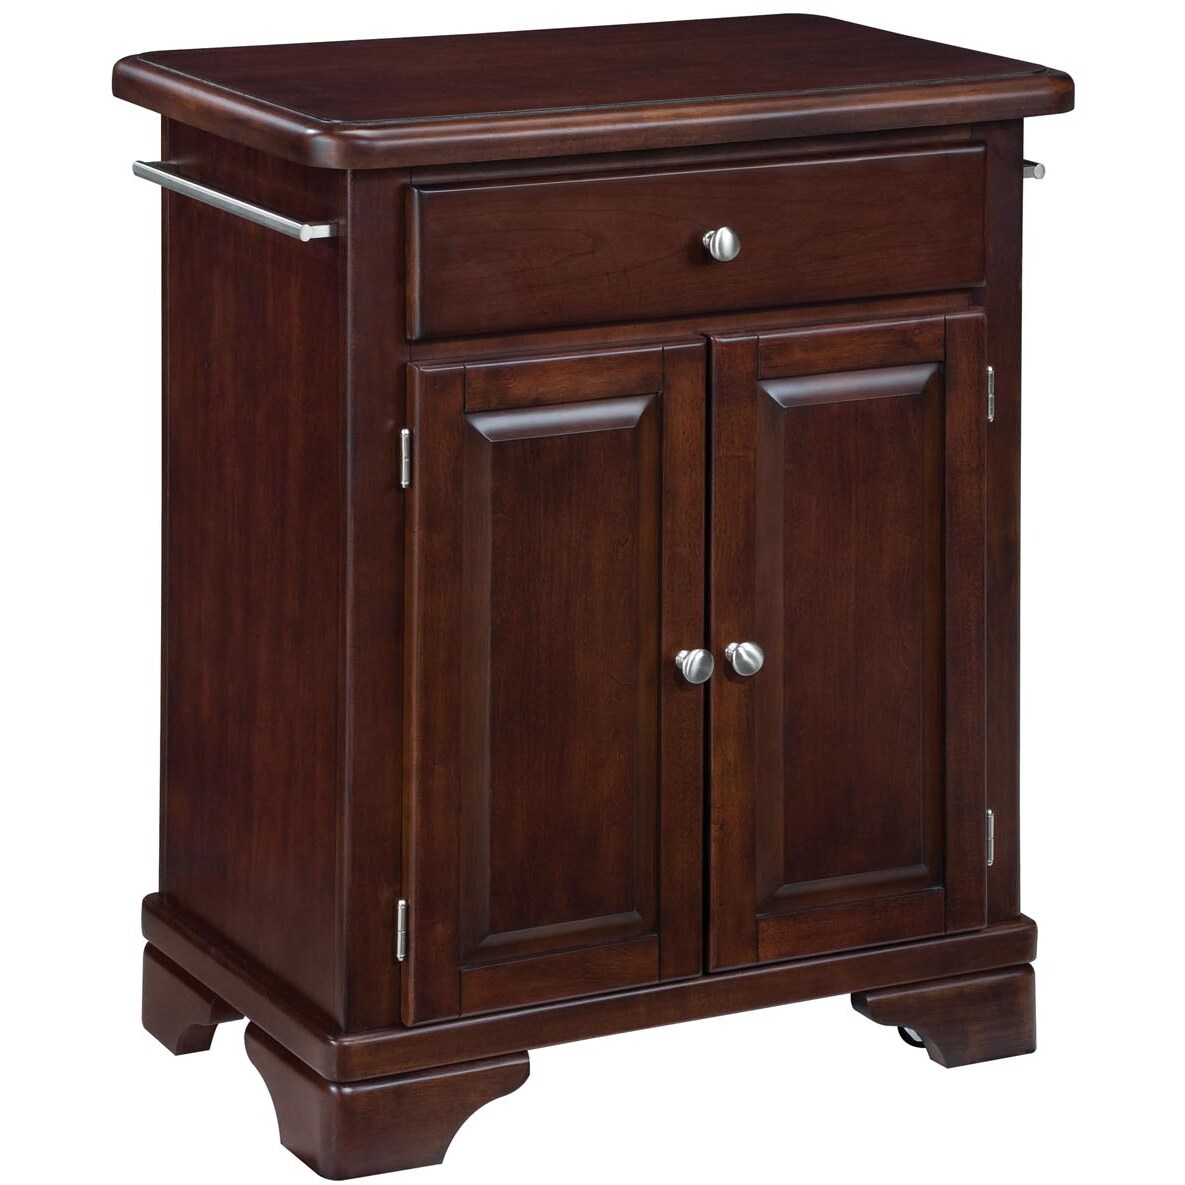 Home Styles Premium Cherry Cuisine Cart with Wood Top - Bed Bath & Beyond -  6620871